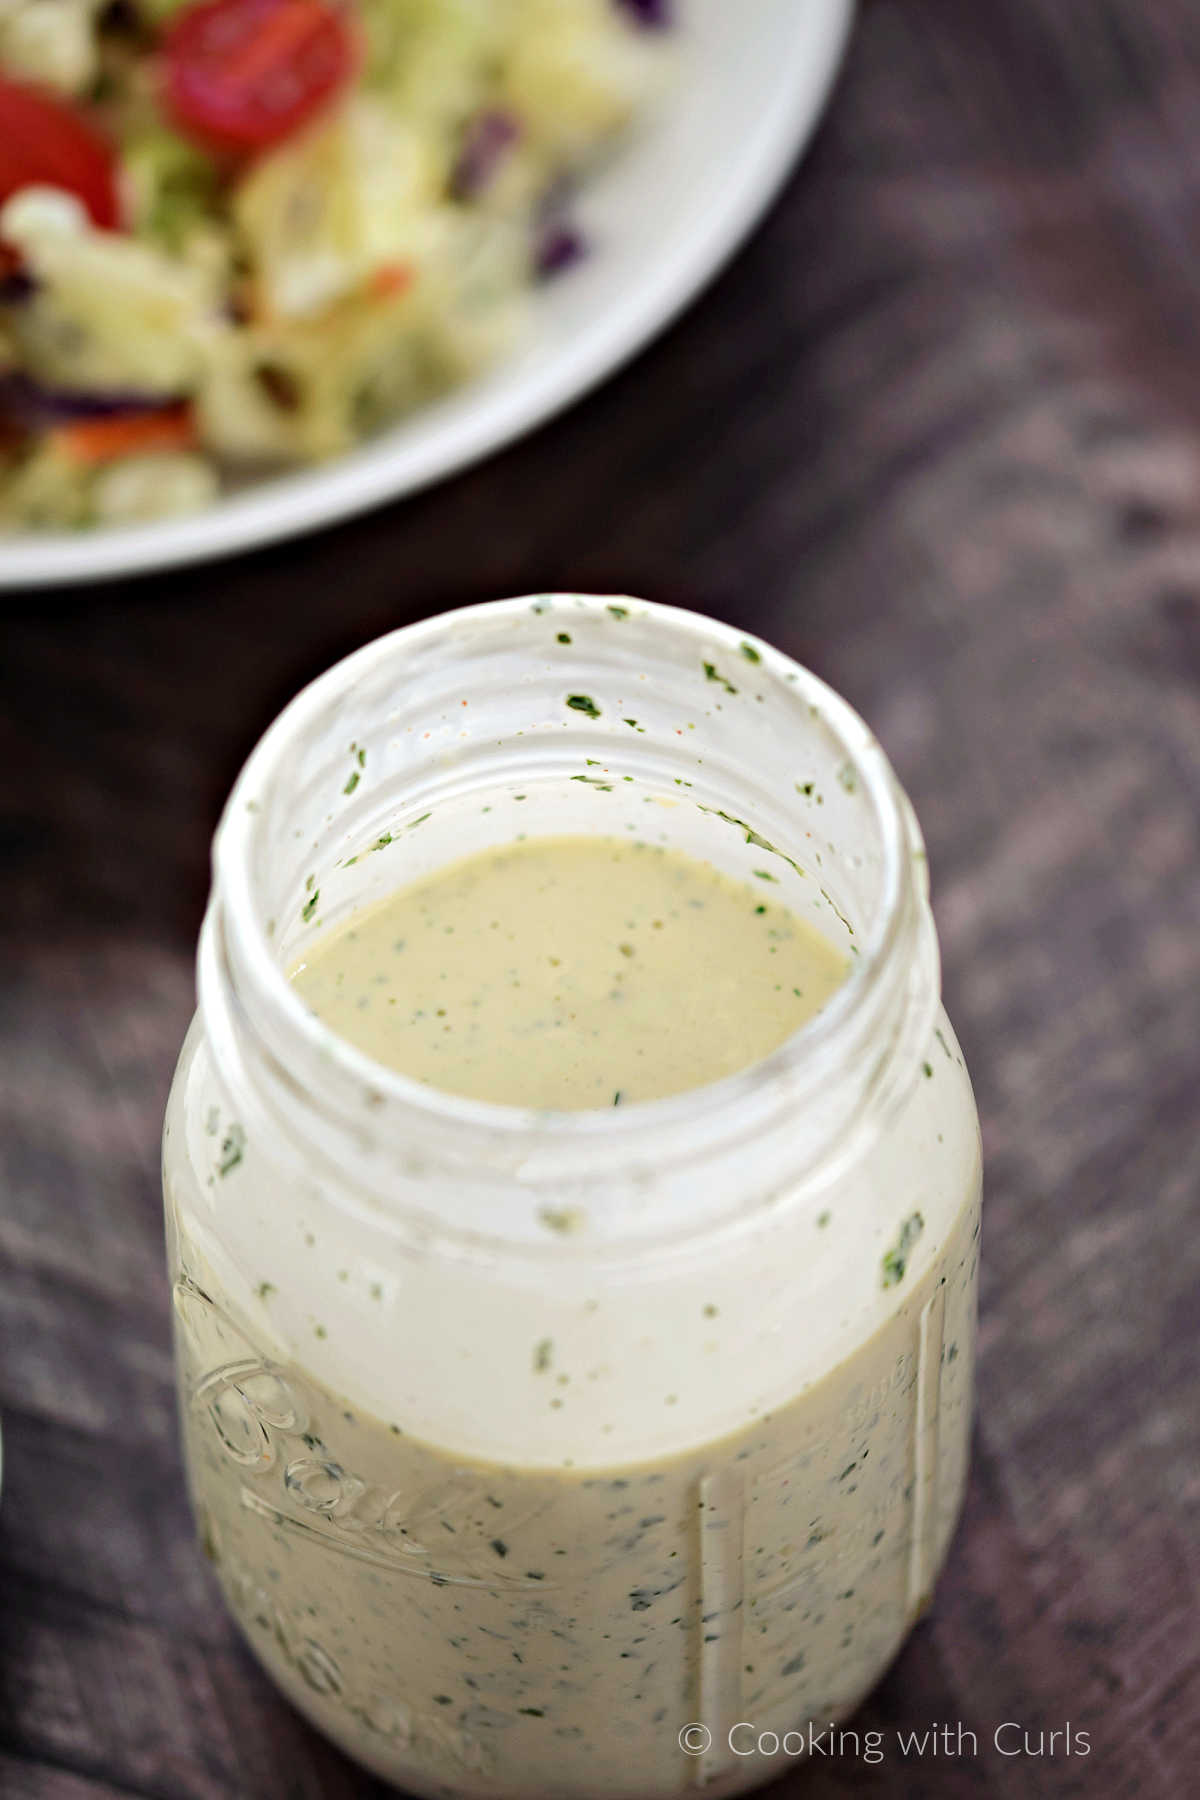 Looking down into a glass jar filled with ranch dressing.